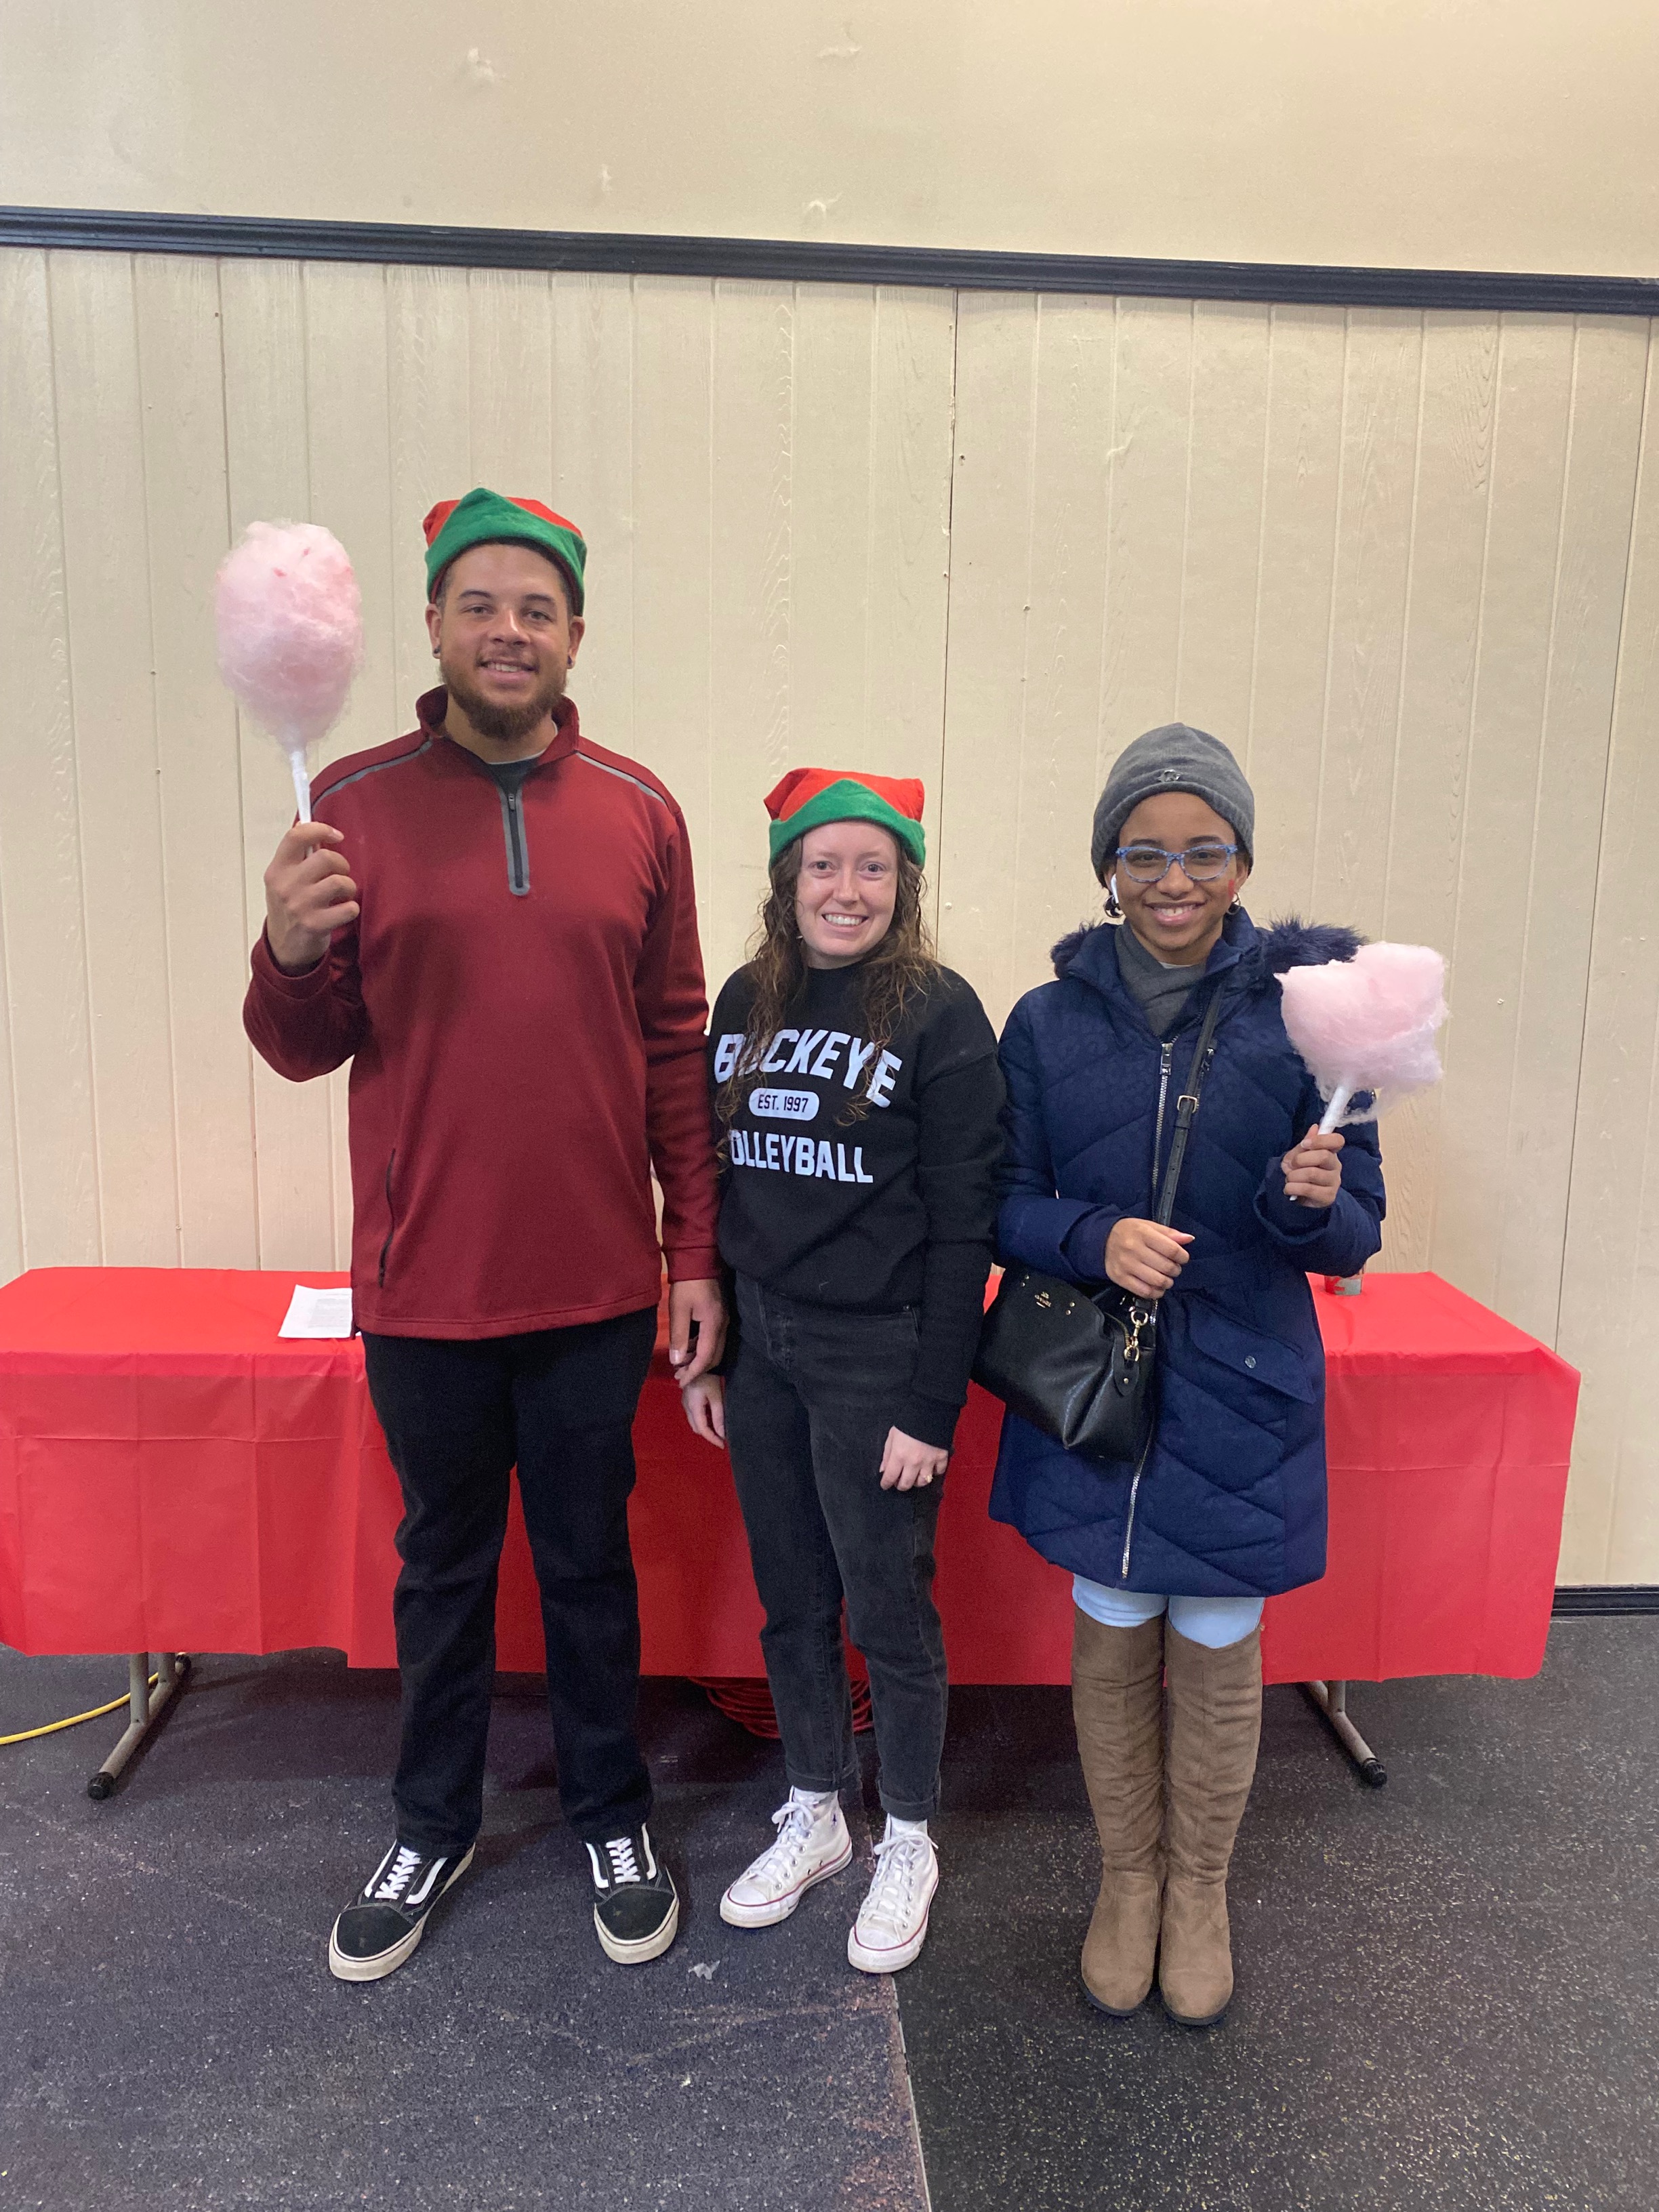 Staff and Student at Cotton Candy Station